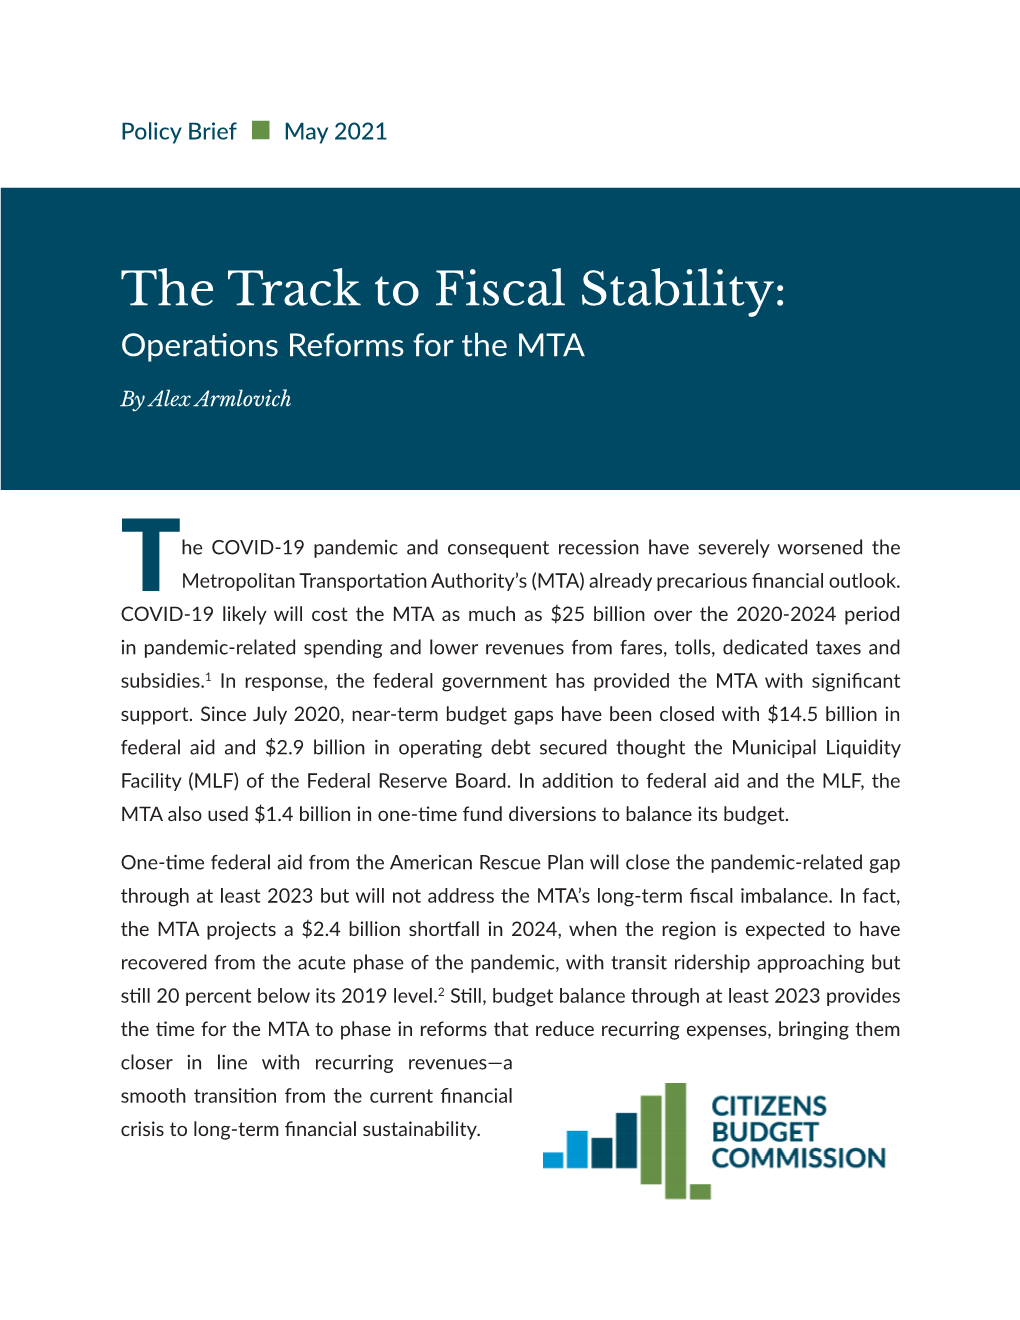 The Track to Fiscal Stability: Operations Reforms for the MTA